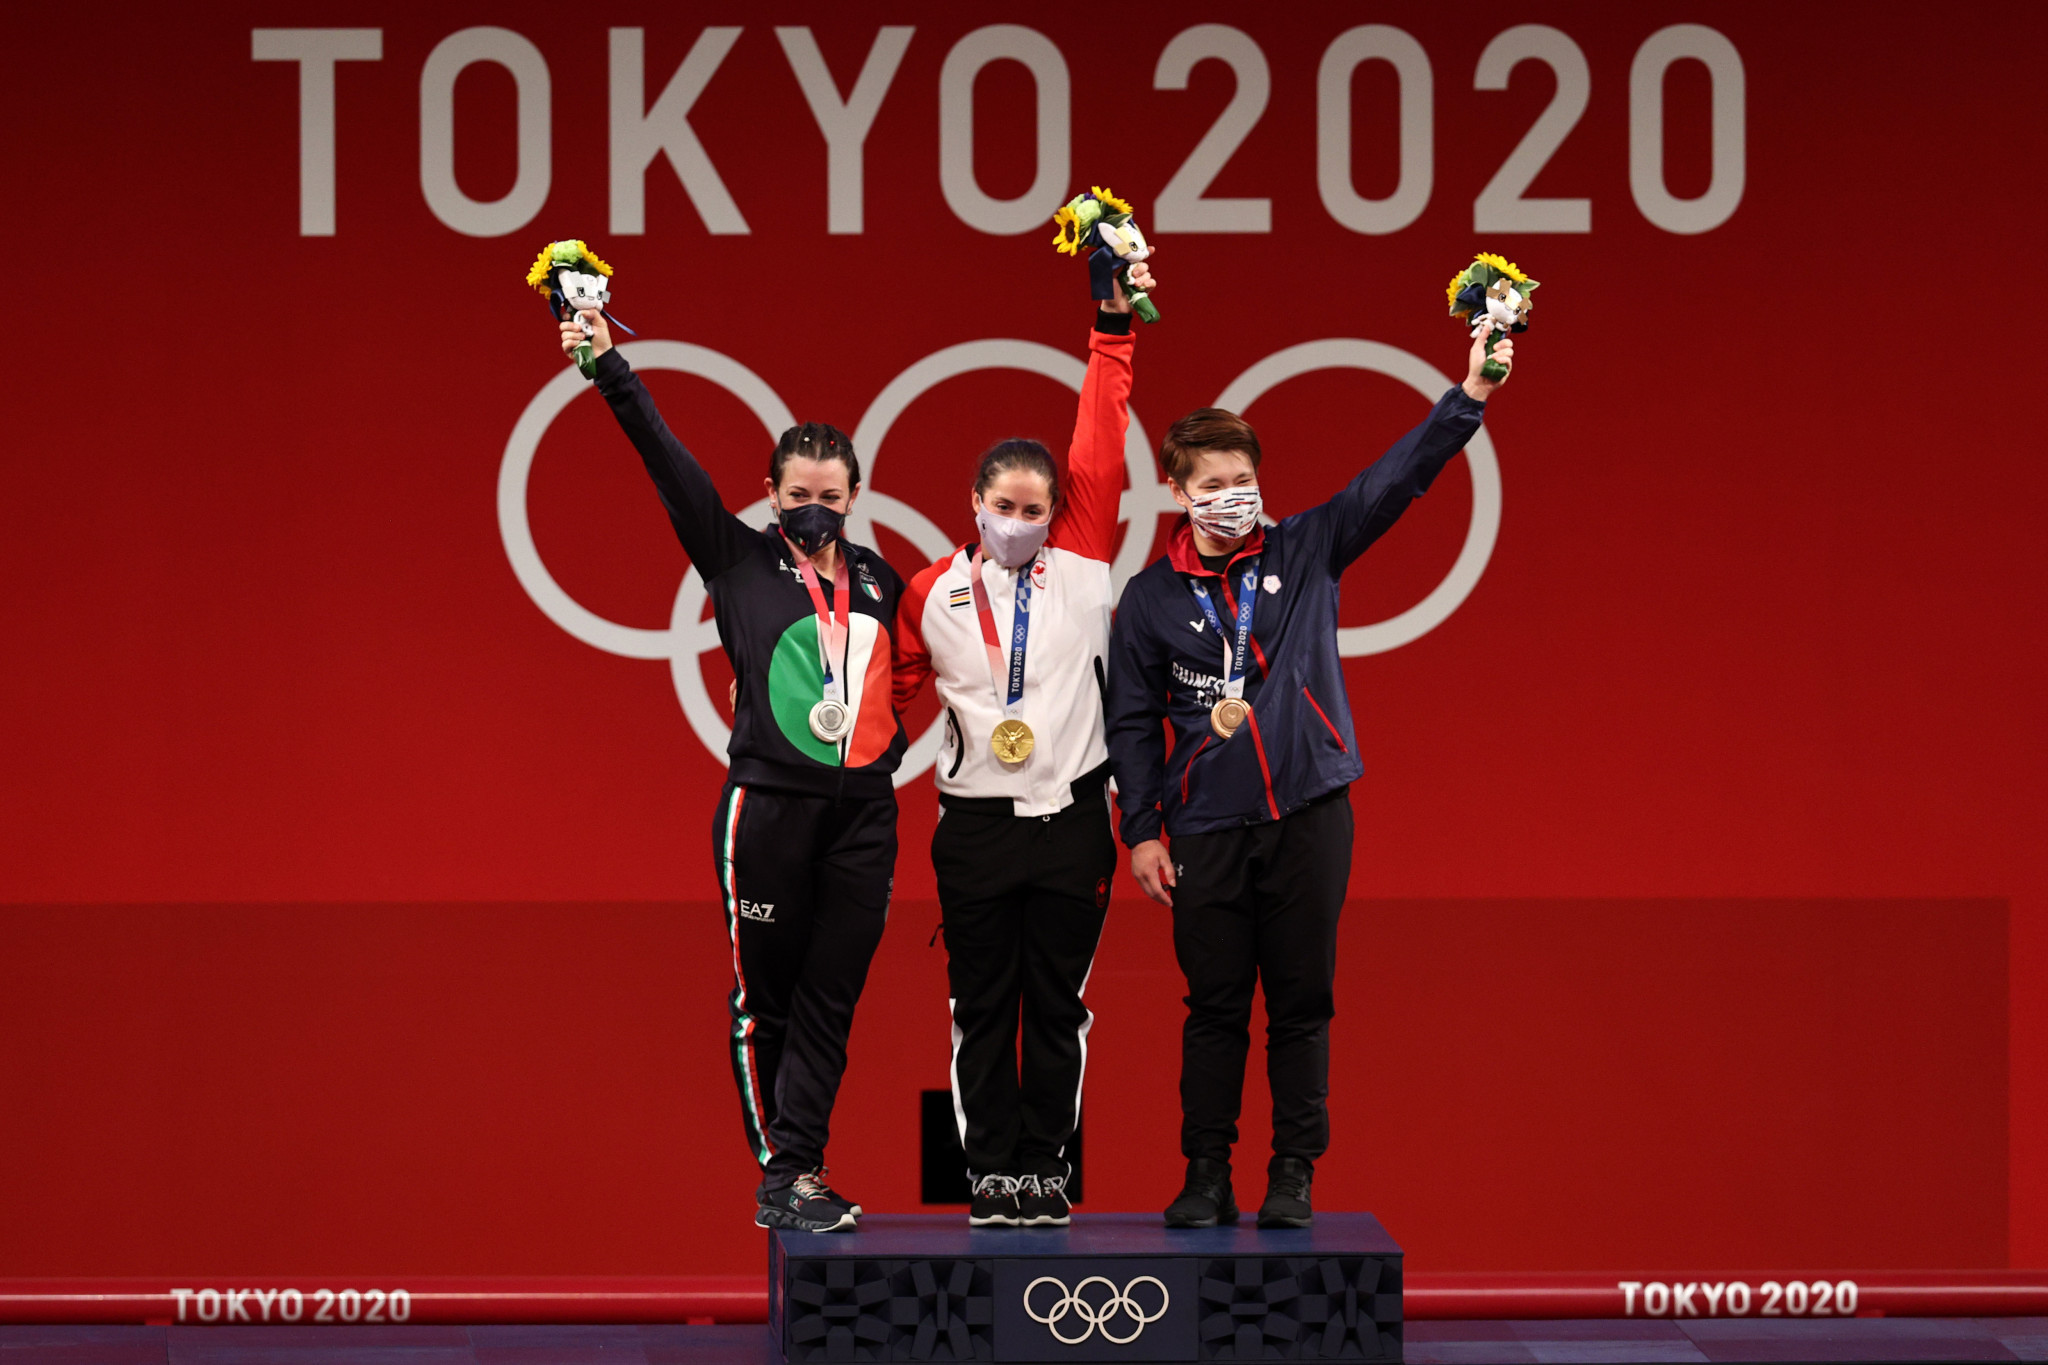 The podium for the women's 64kg category - from left Giorgia Bordignon, Maude Charron and Chen Wen-Huei ©Getty Images